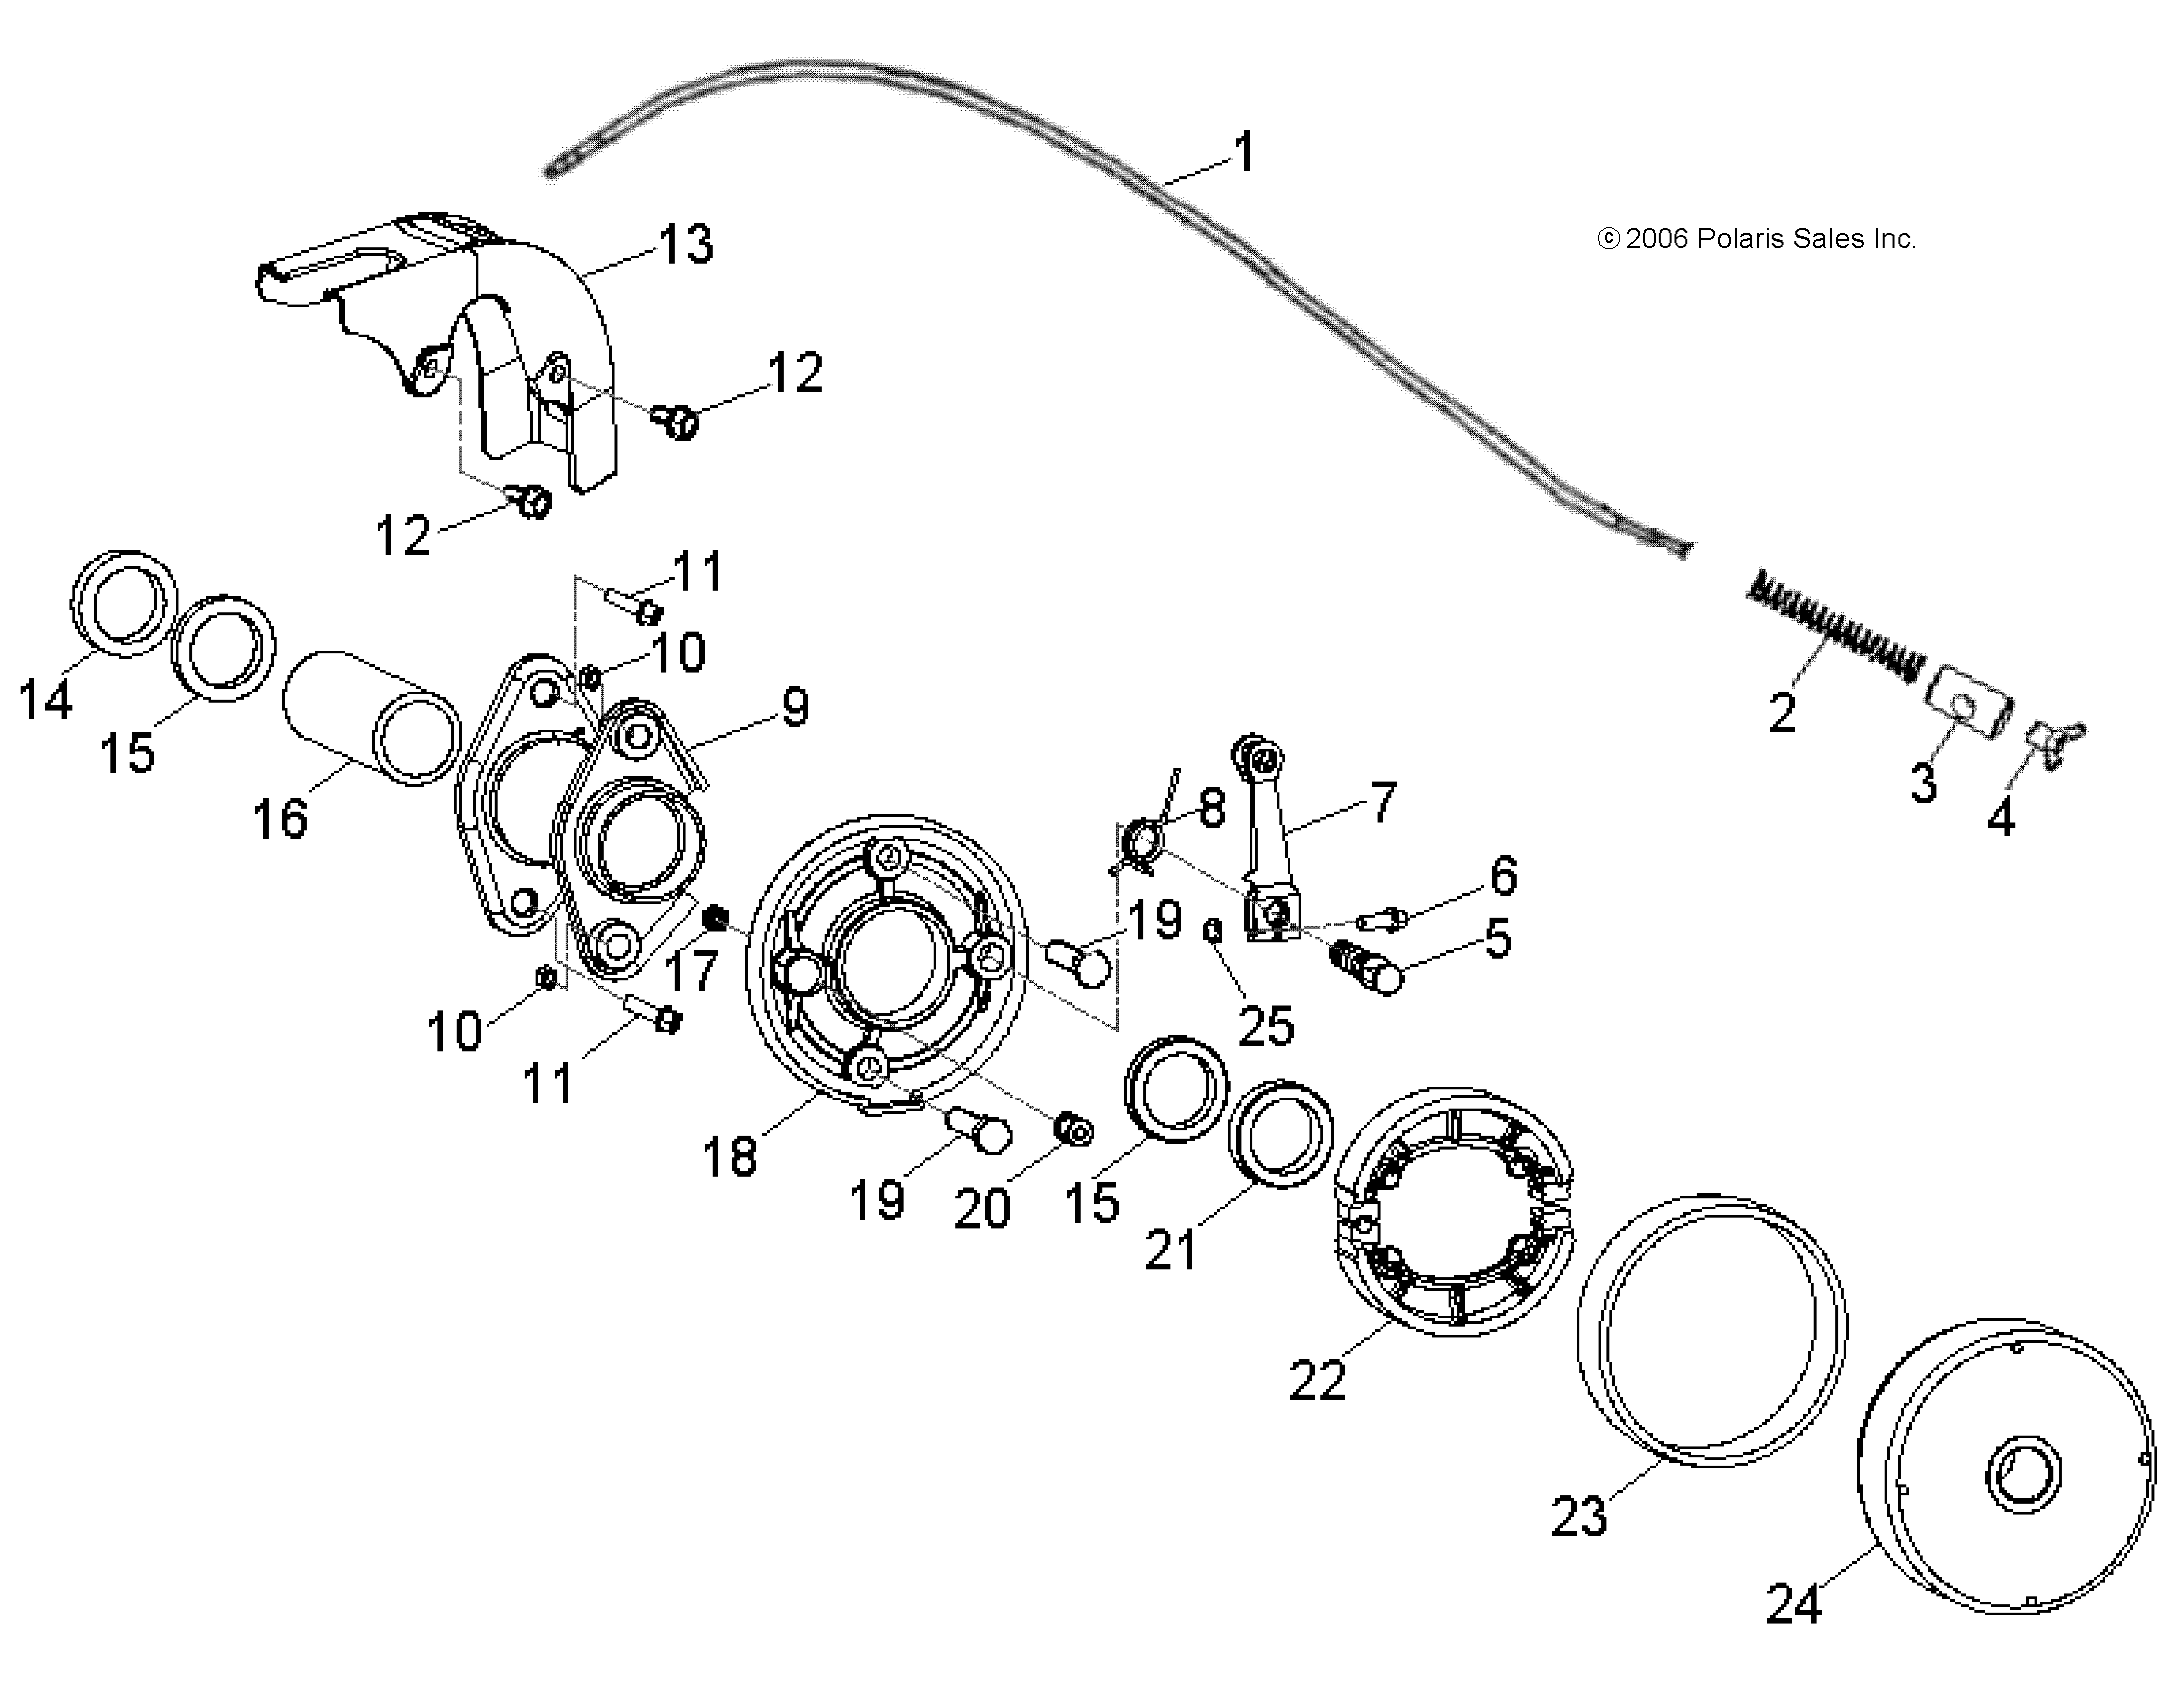 Part Number : 0454718 CABLE-BRAKE REAR